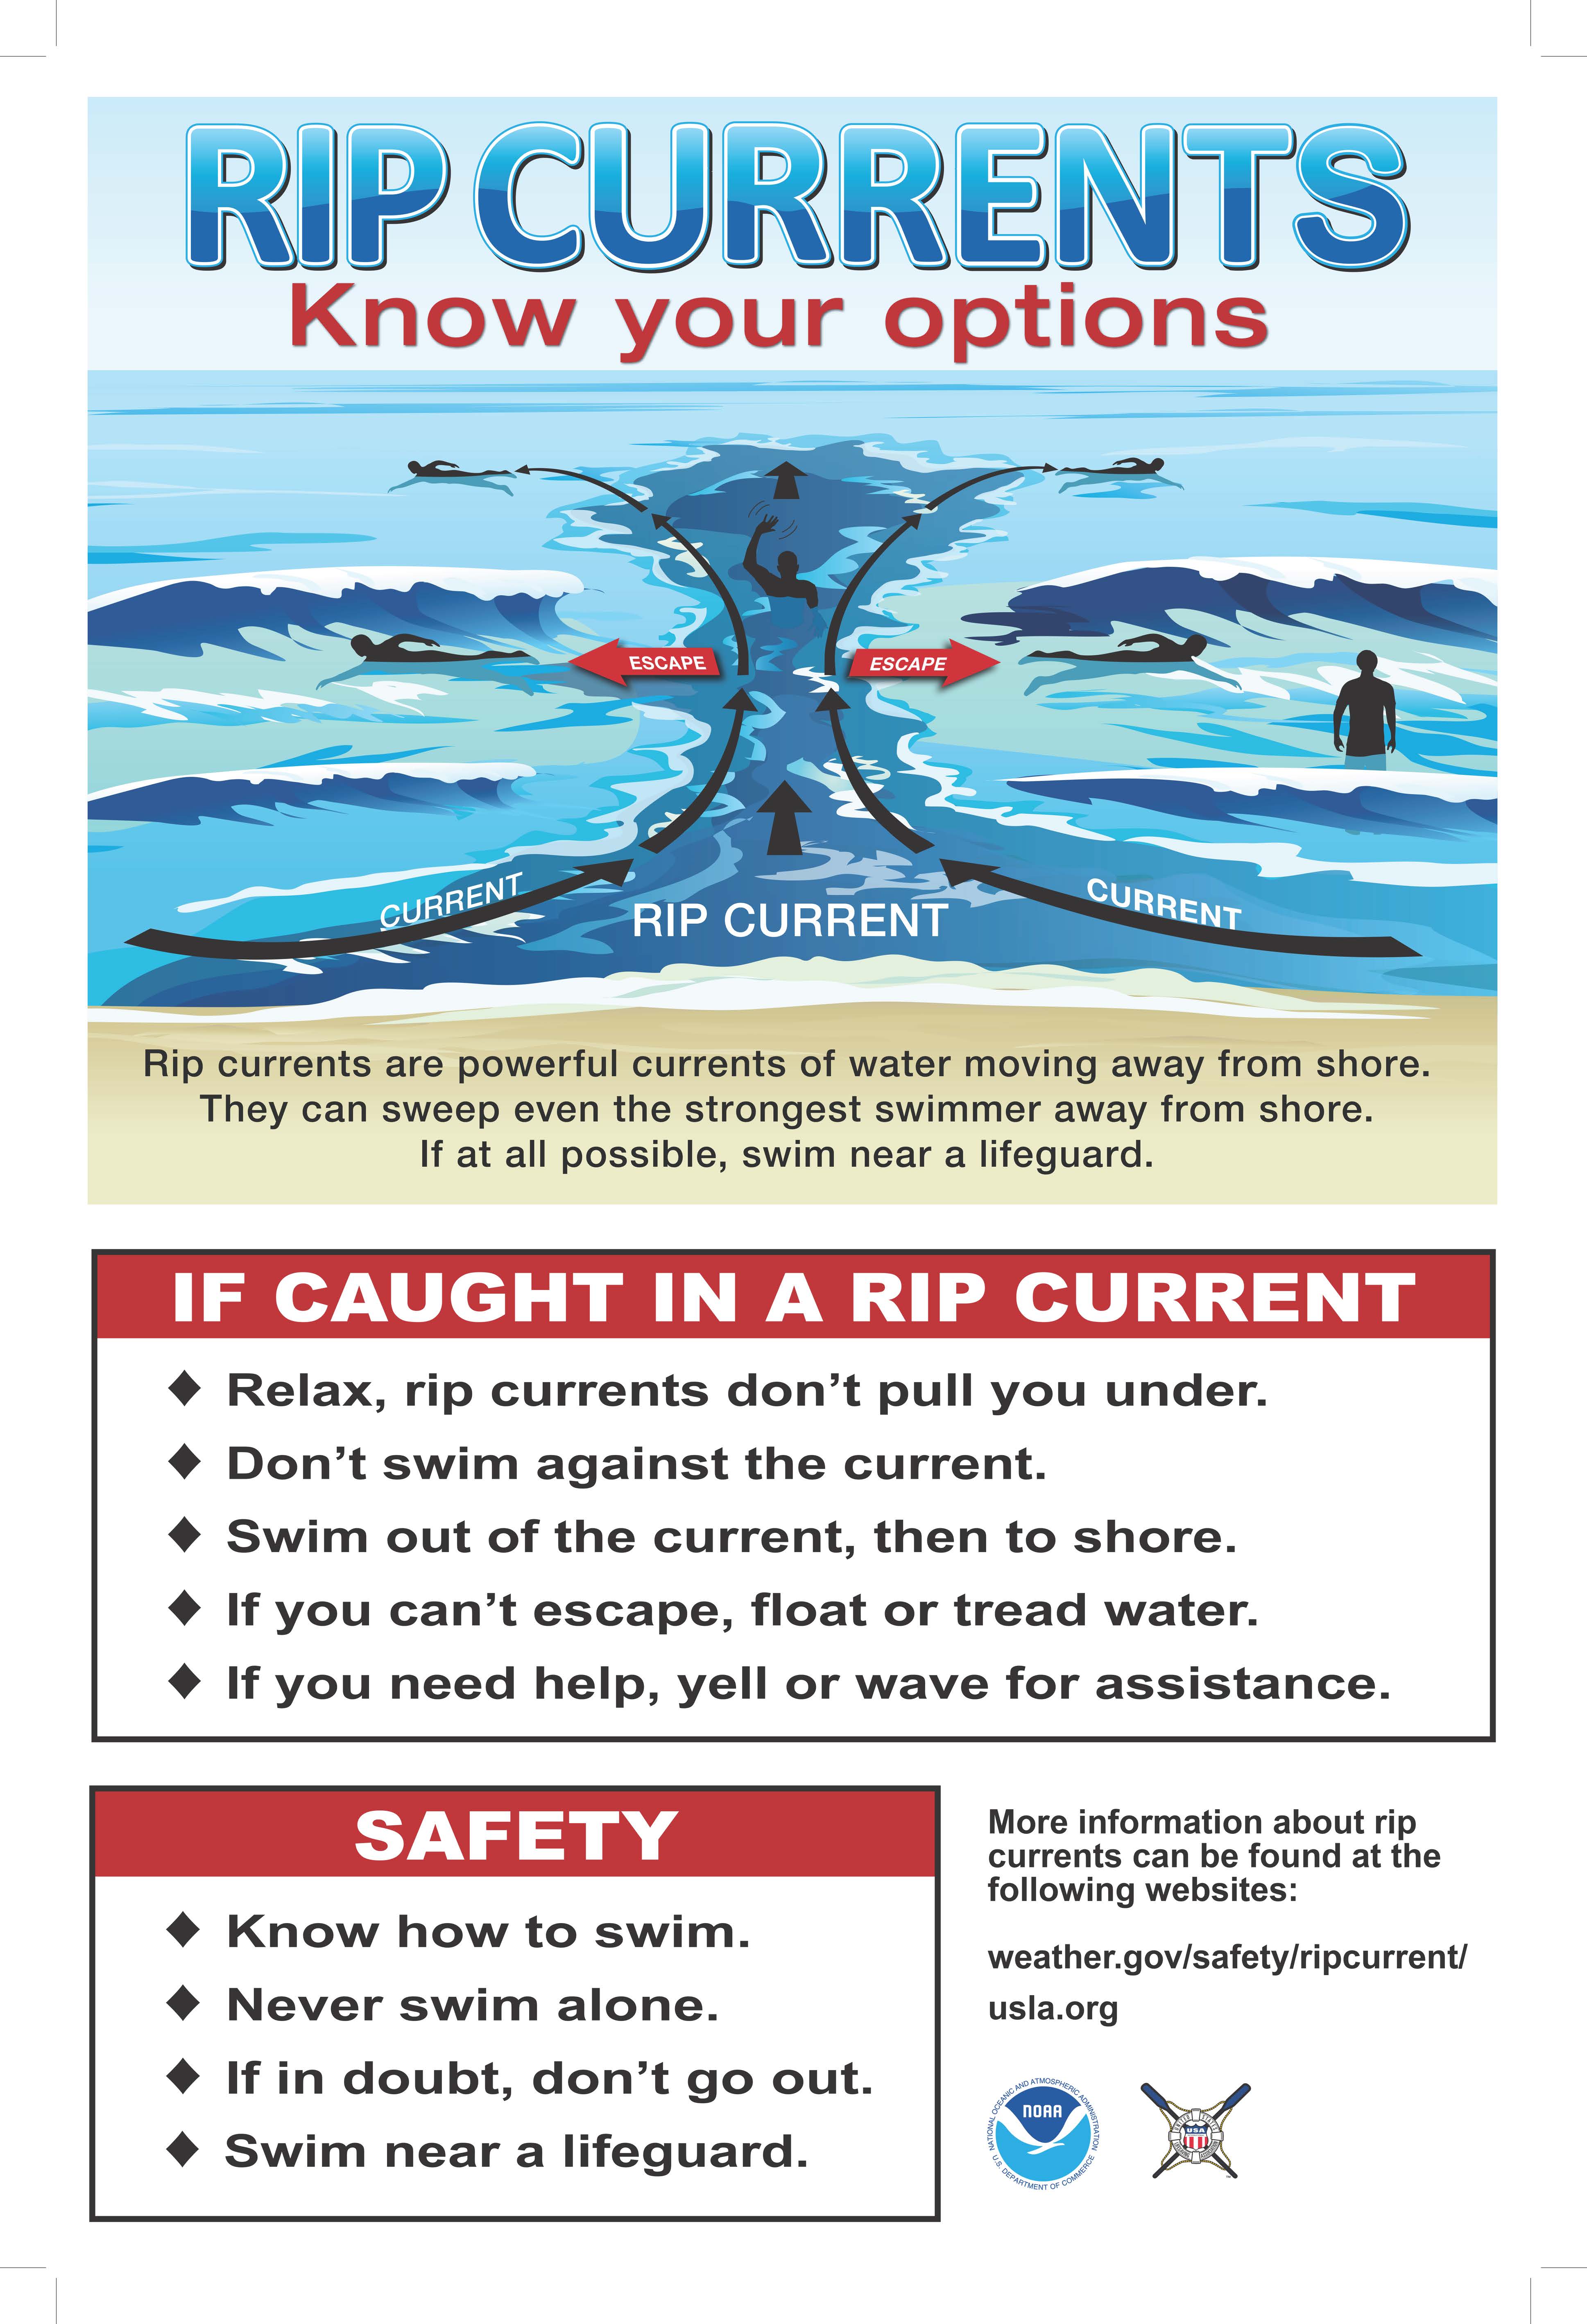 Windy Weather Means Warnings And High Surf. We Have Some Safety Tips